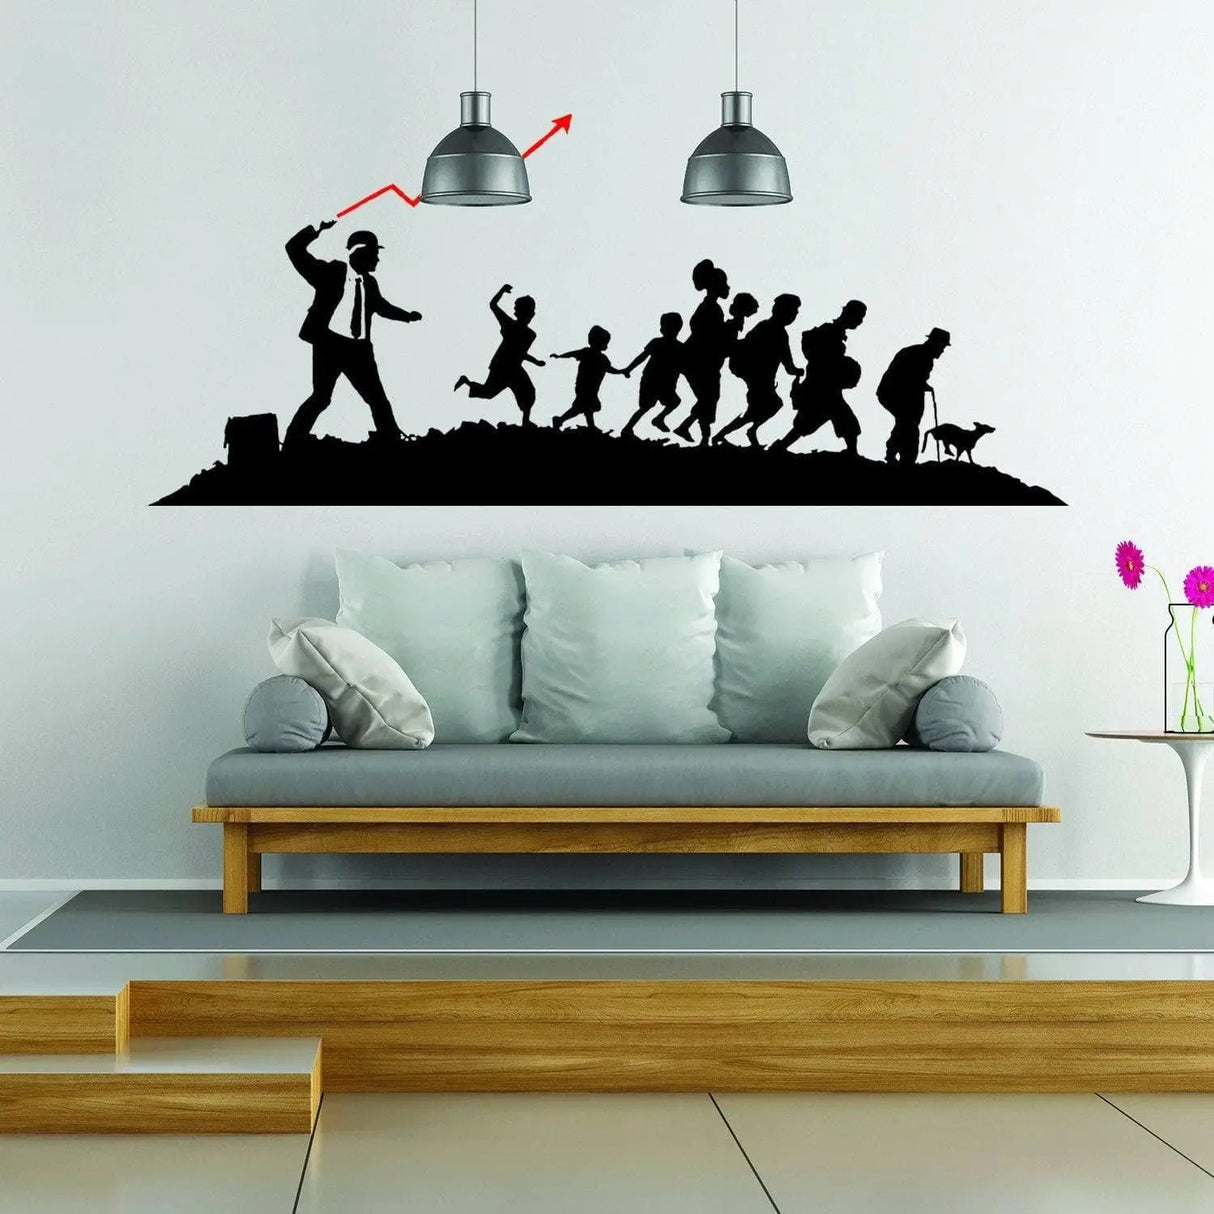 Banksy Businessman Vinyl Wall Sticker - Art Home Decor Cool And Premium Waterproof Decal - Adult Graffiti With Quality Keen Bansky Laptop - Decords